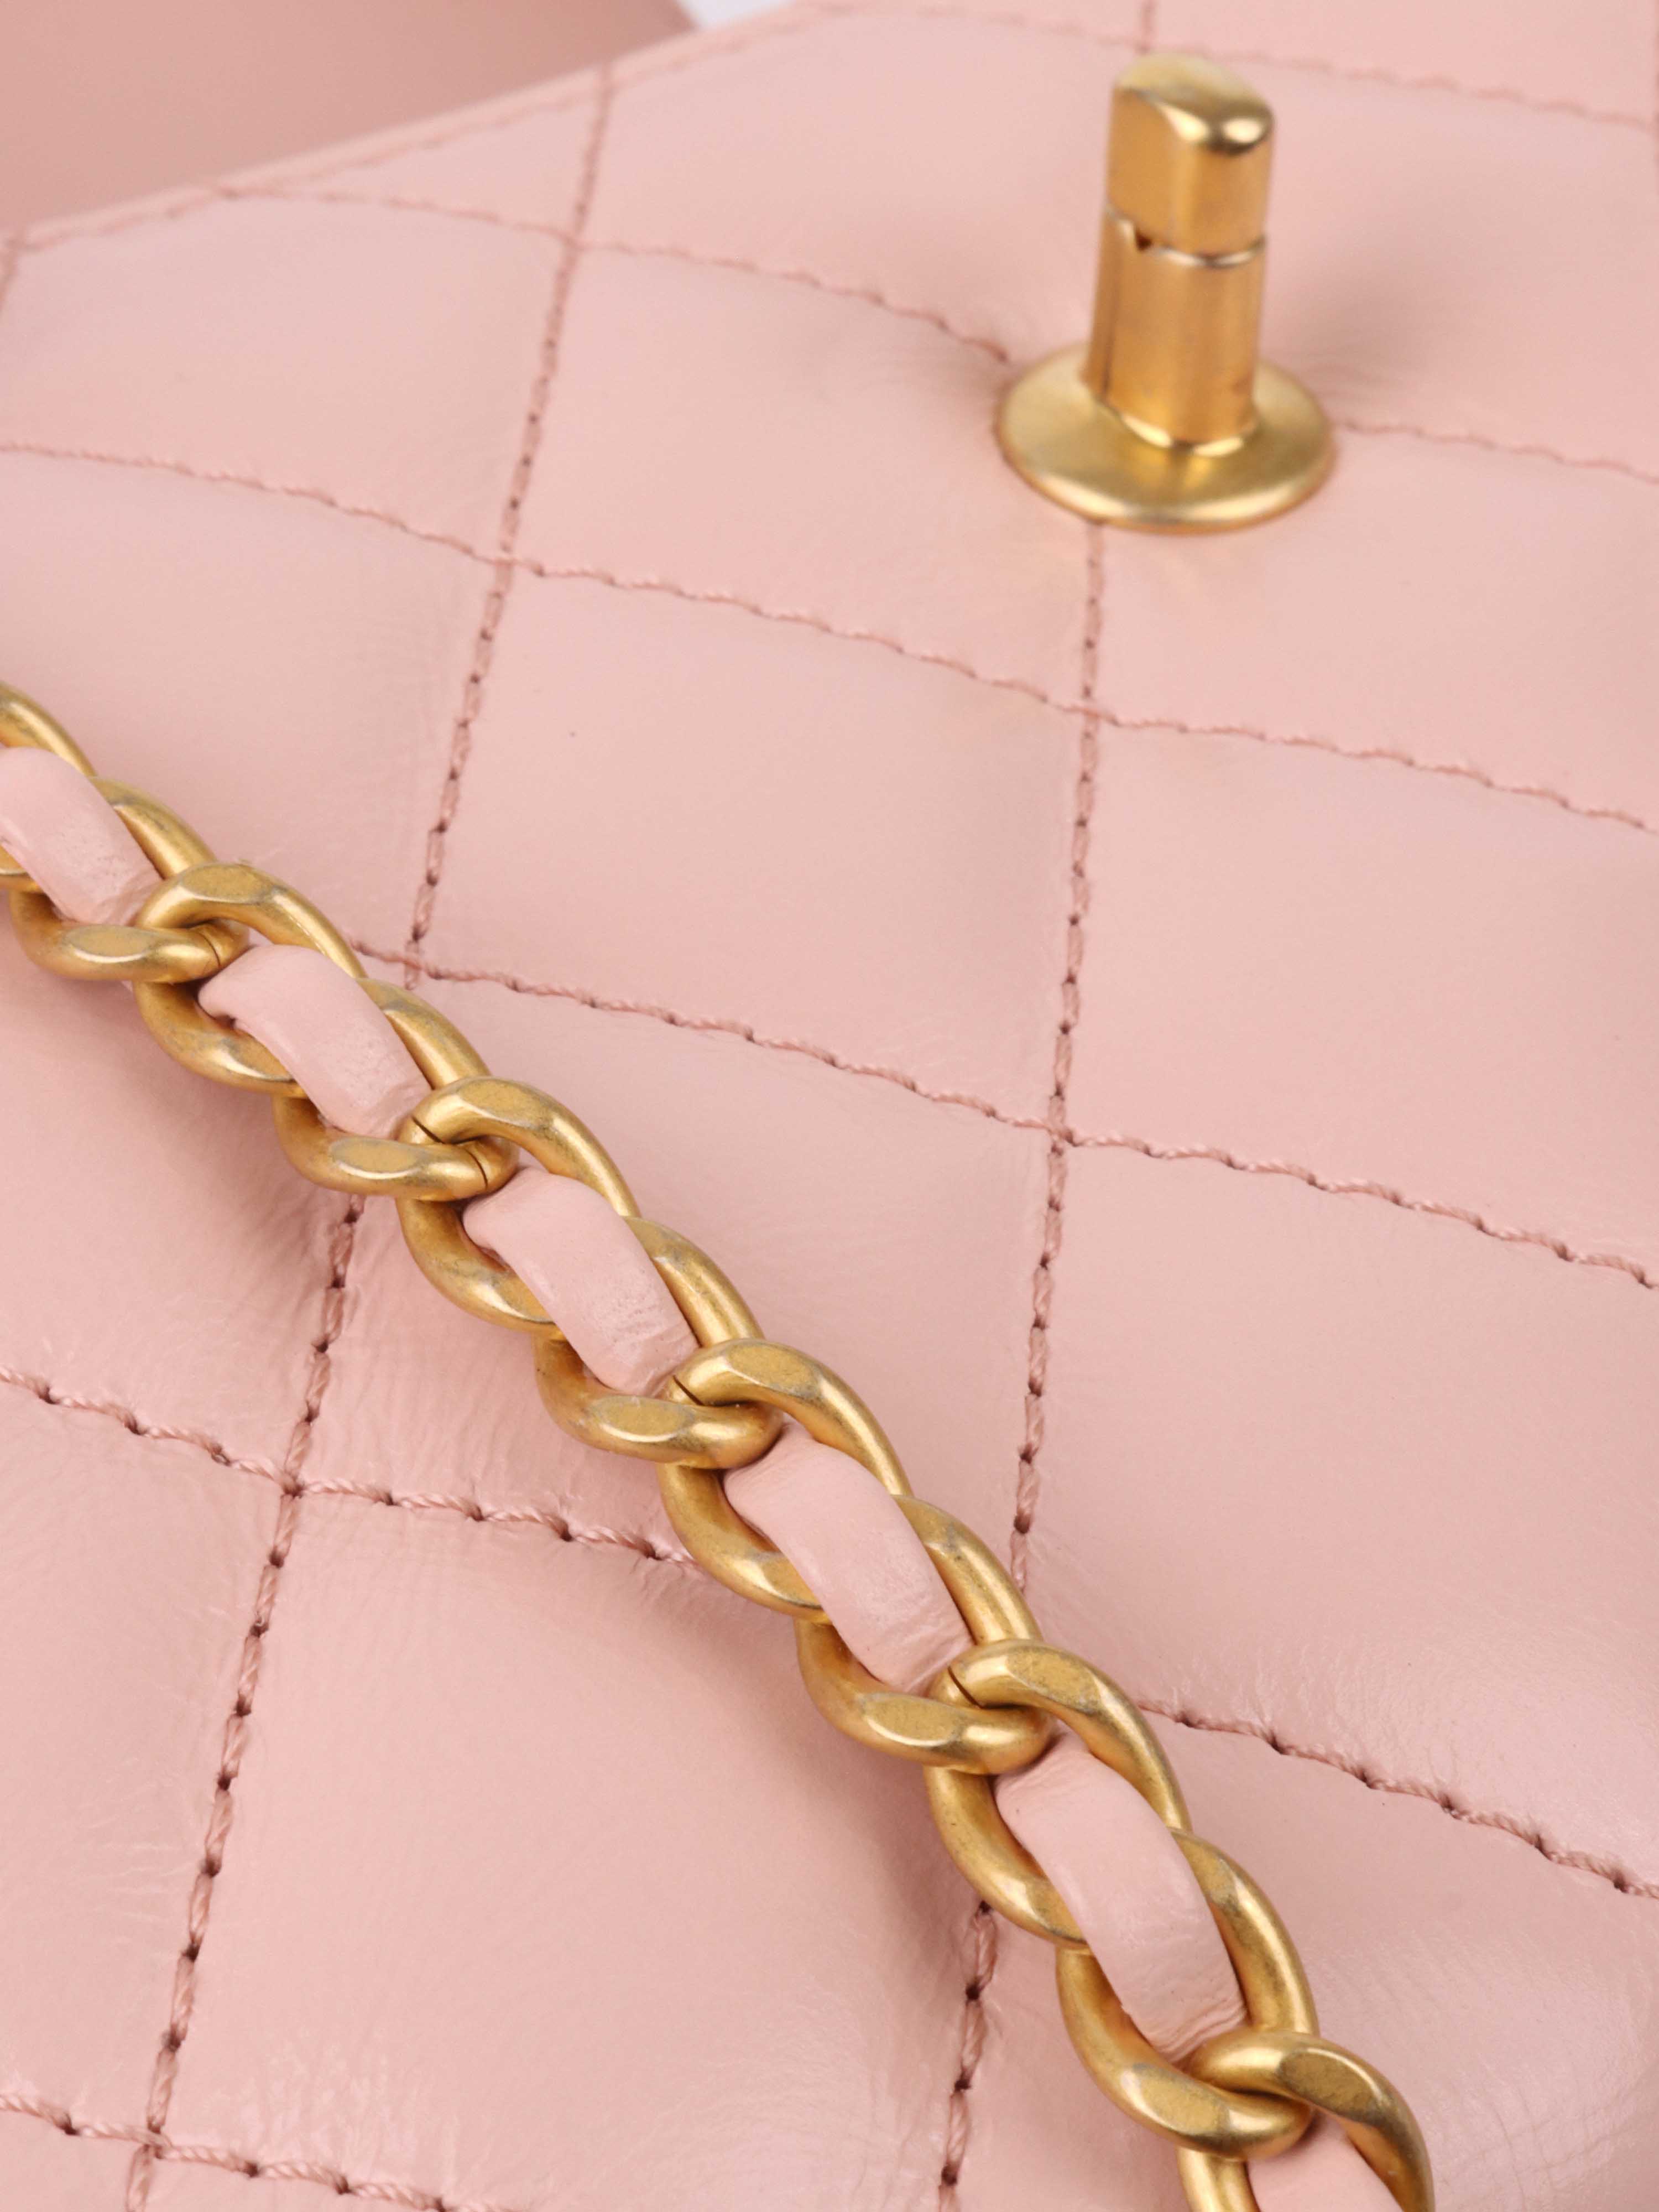 Chanel Pink Small Kelly Bag.